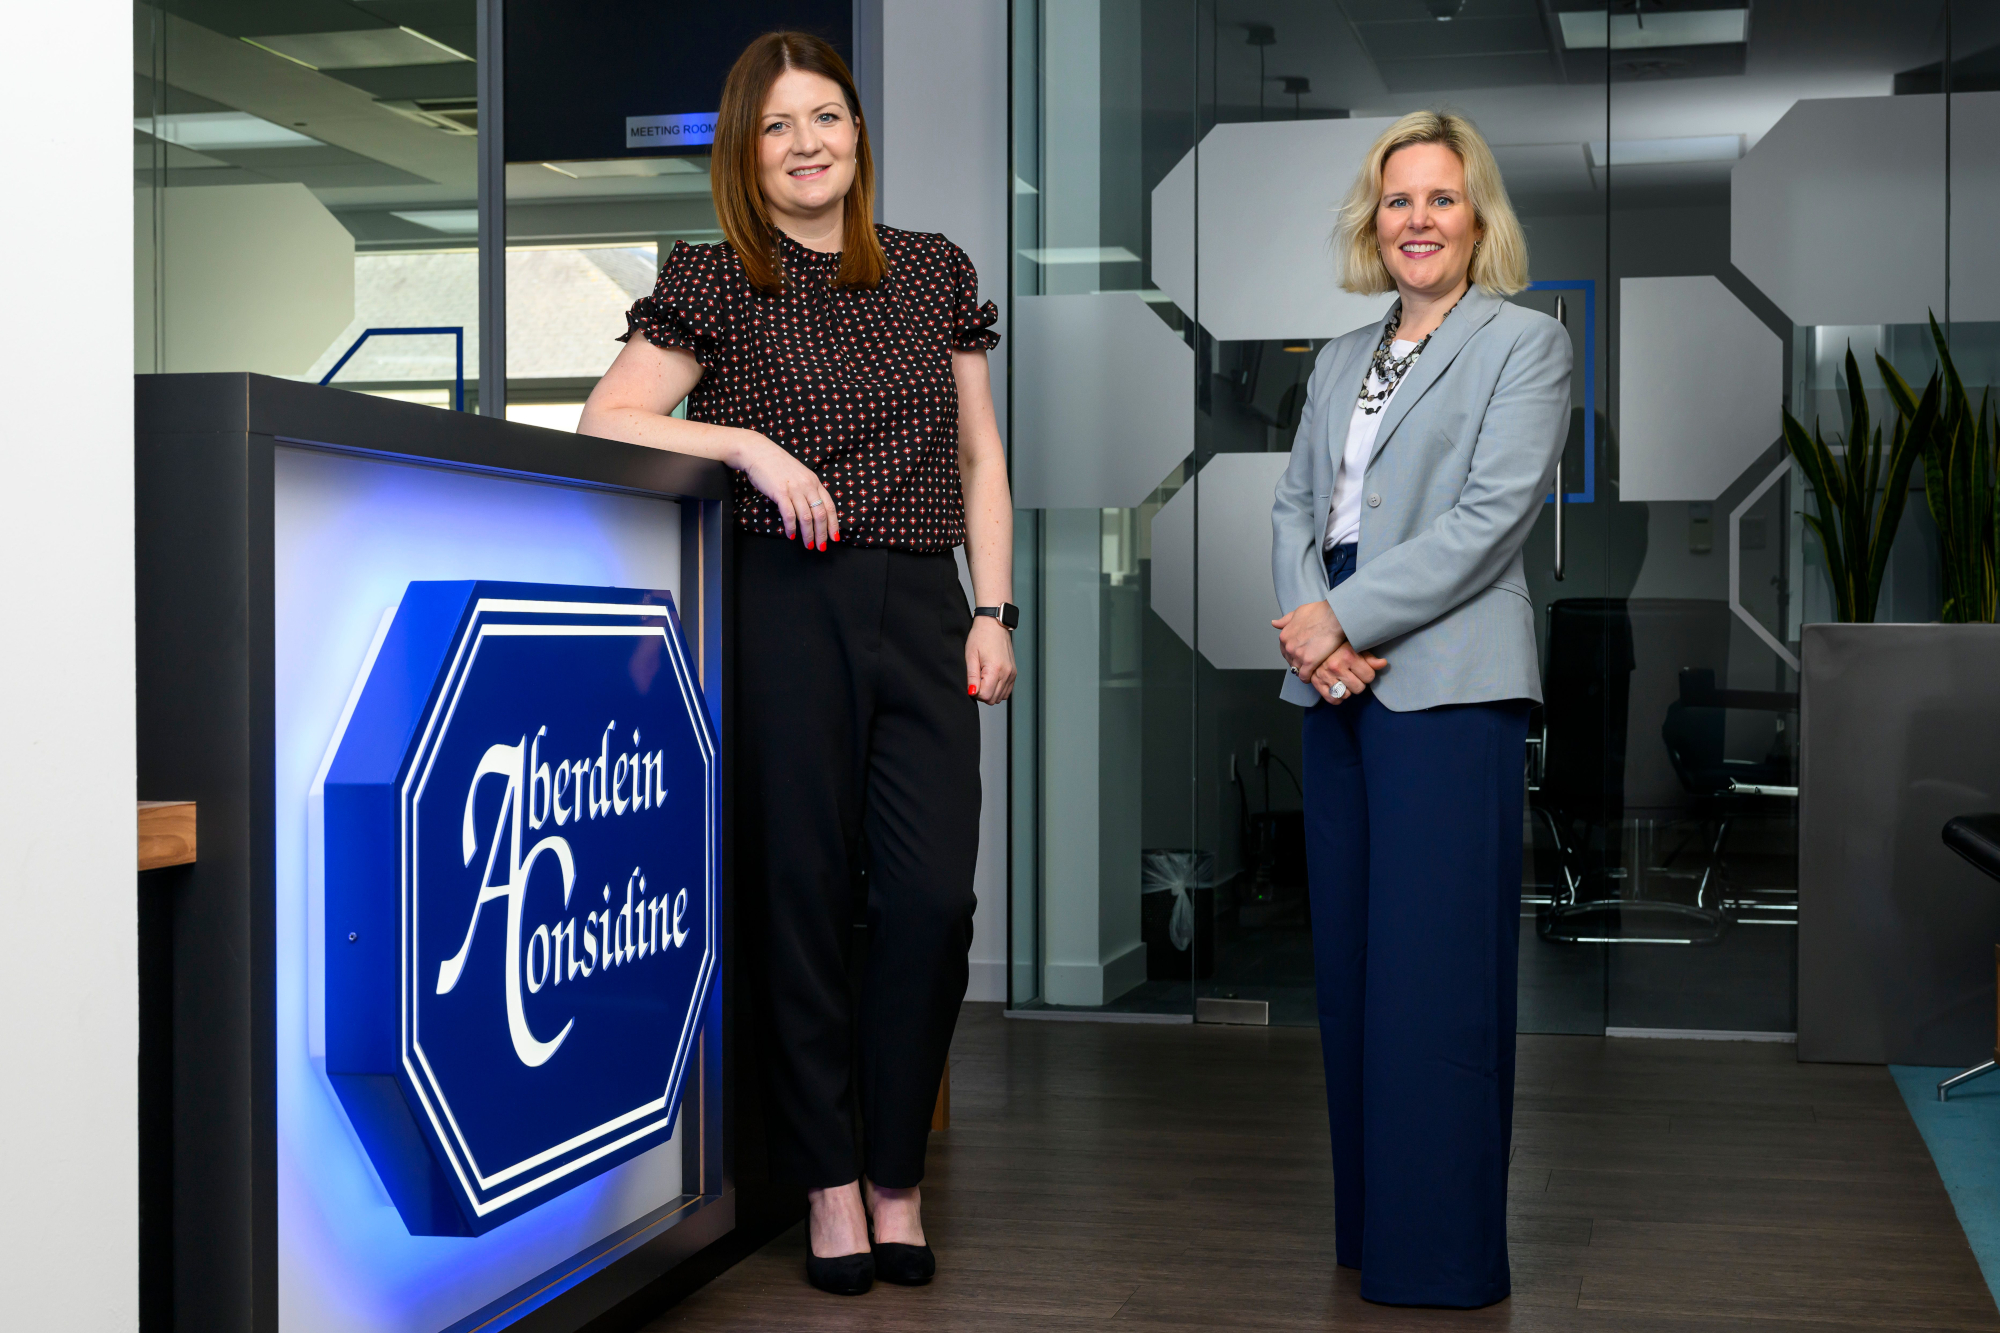 Aberdein Considine to boost profile with new PR appointment